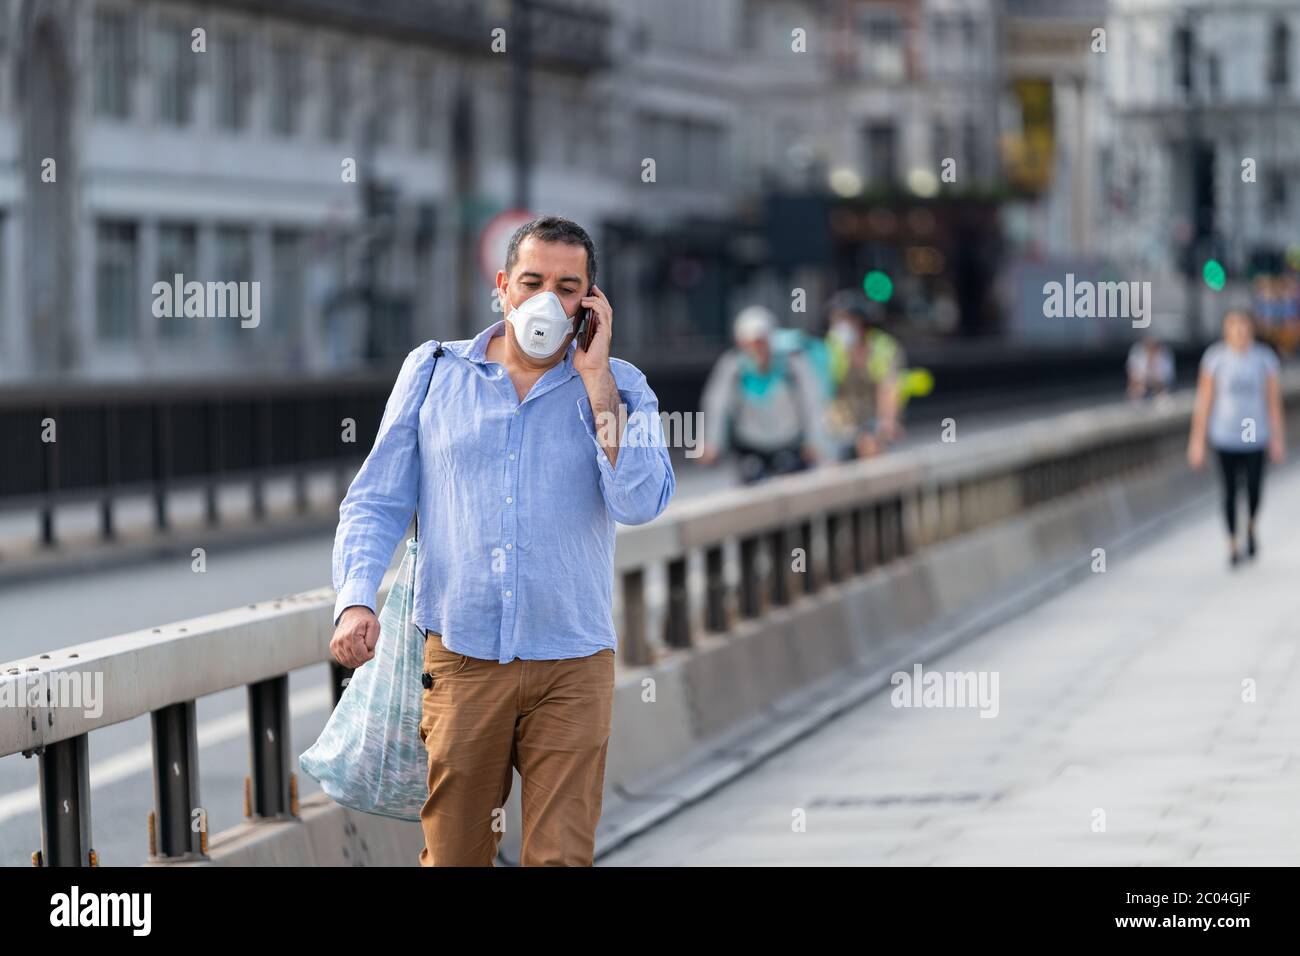 Middle aged Middle Eastern Arabic man walking along Waterloo Bridge in London, England wearing a face mask and talking on his mobile phone Stock Photo